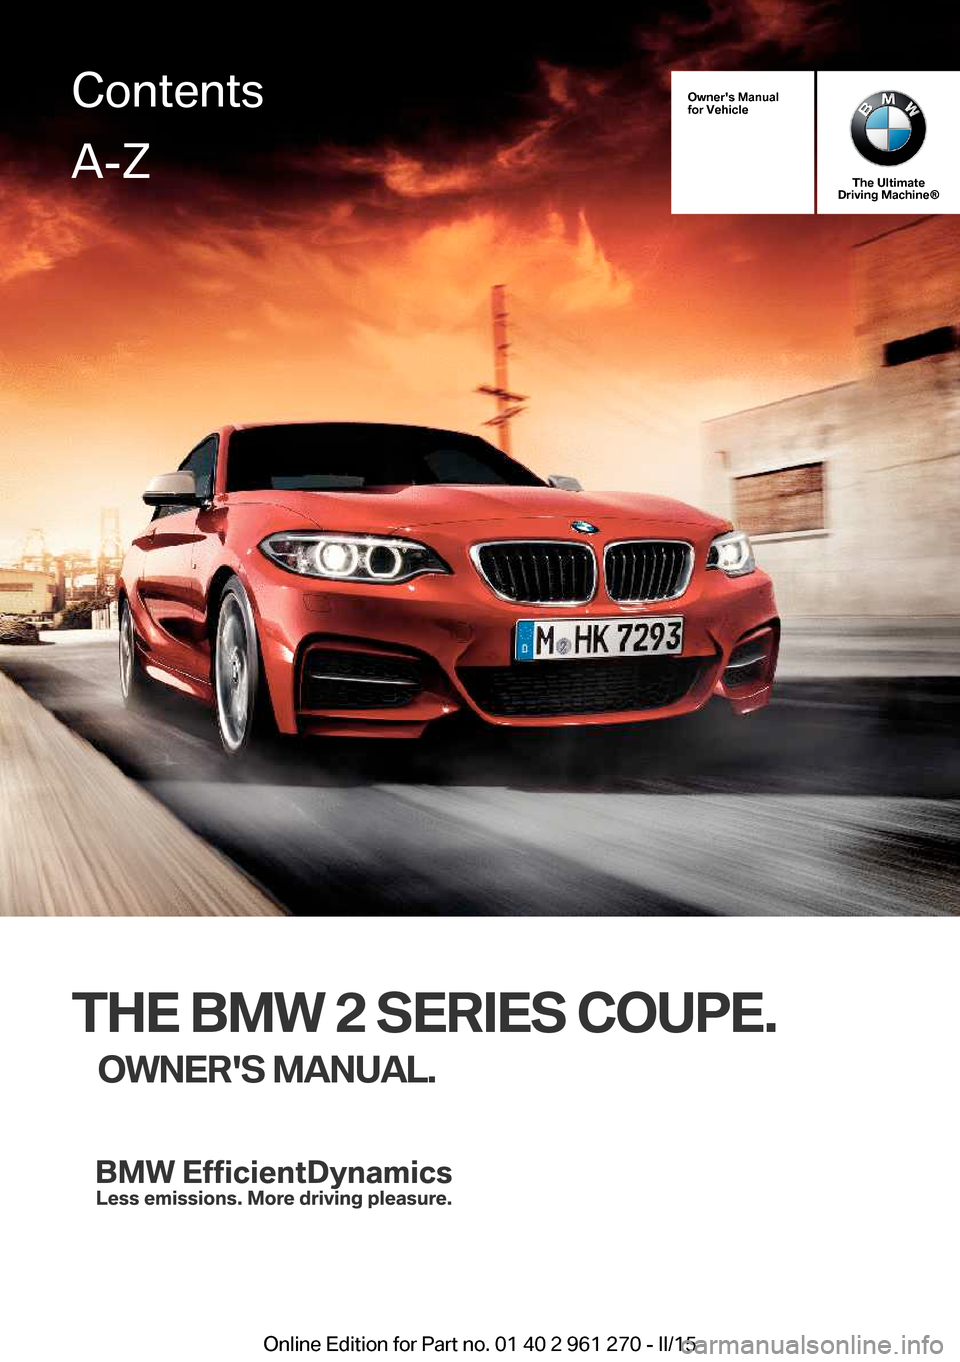 BMW 2 SERIES COUPE 2015 F22 Owners Manual Owners Manual
for Vehicle
The Ultimate
Driving Machine®
THE BMW 2 SERIES COUPE.
OWNERS MANUAL.
ContentsA-Z
Online Edition for Part no. 01 40 2 961 270 - II/15   